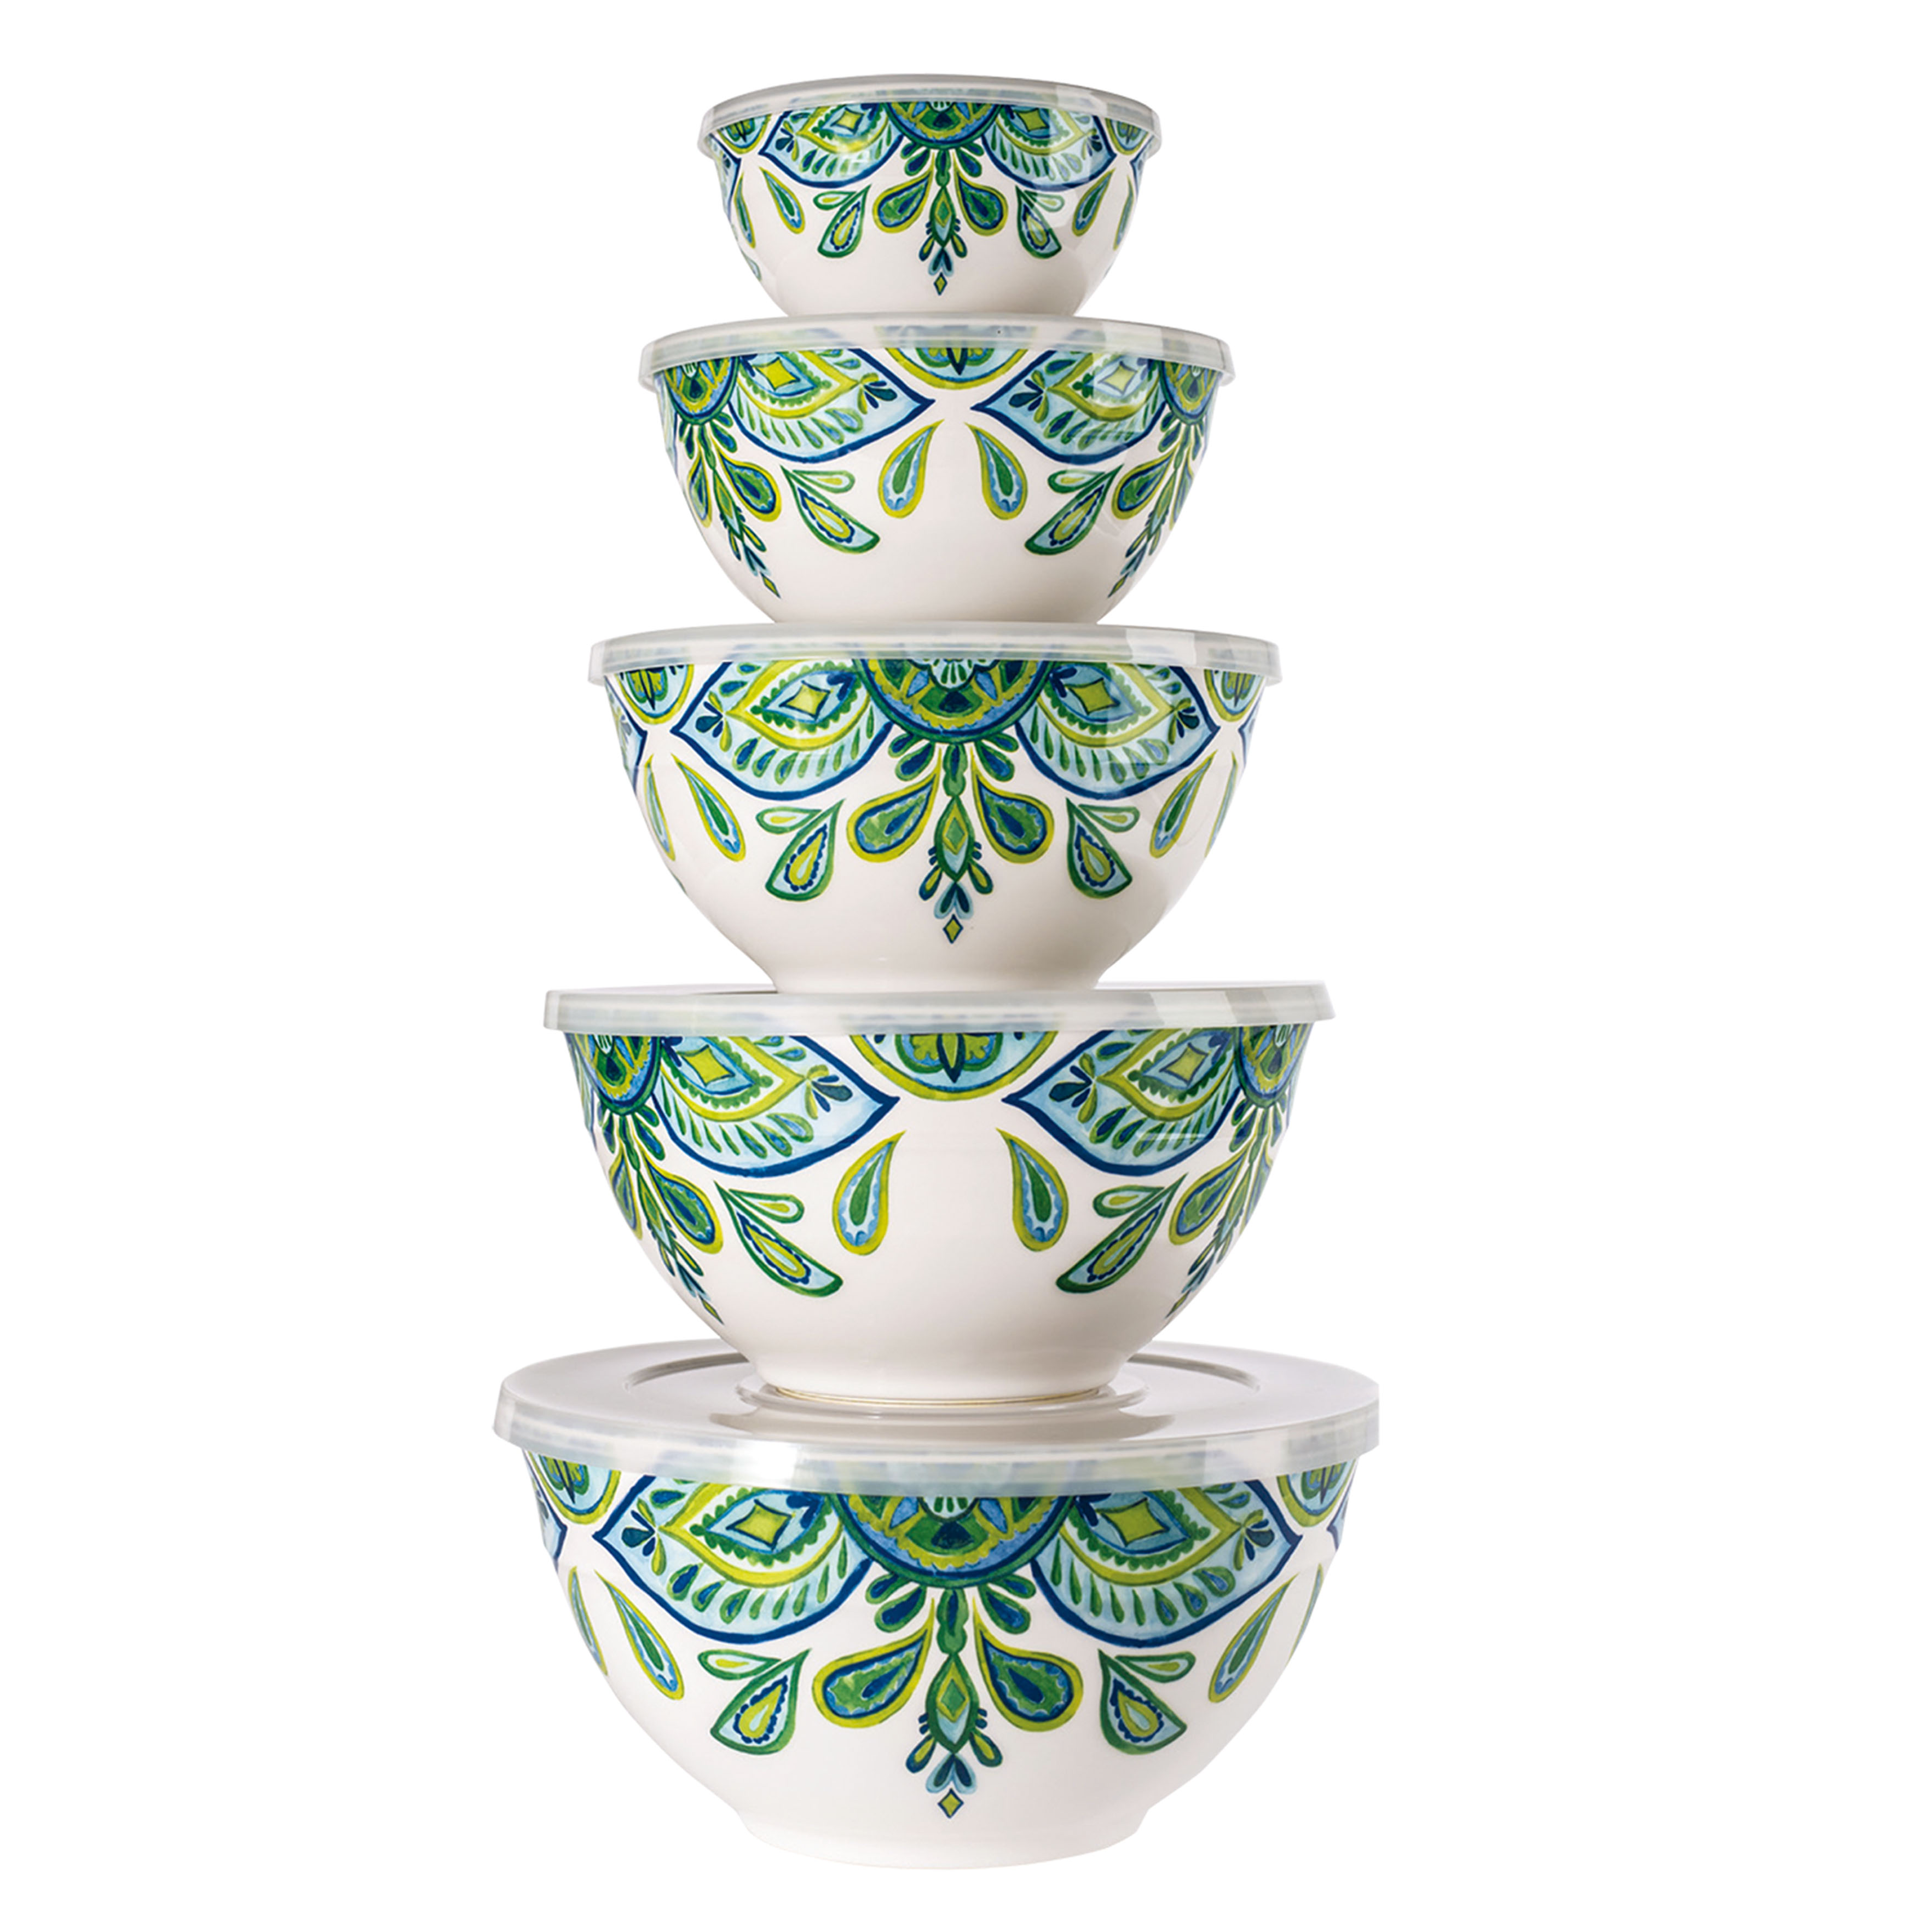 10 Piece Melamine Mixing Bowl Set with Lids, Green and Blue Floral - image 1 of 8